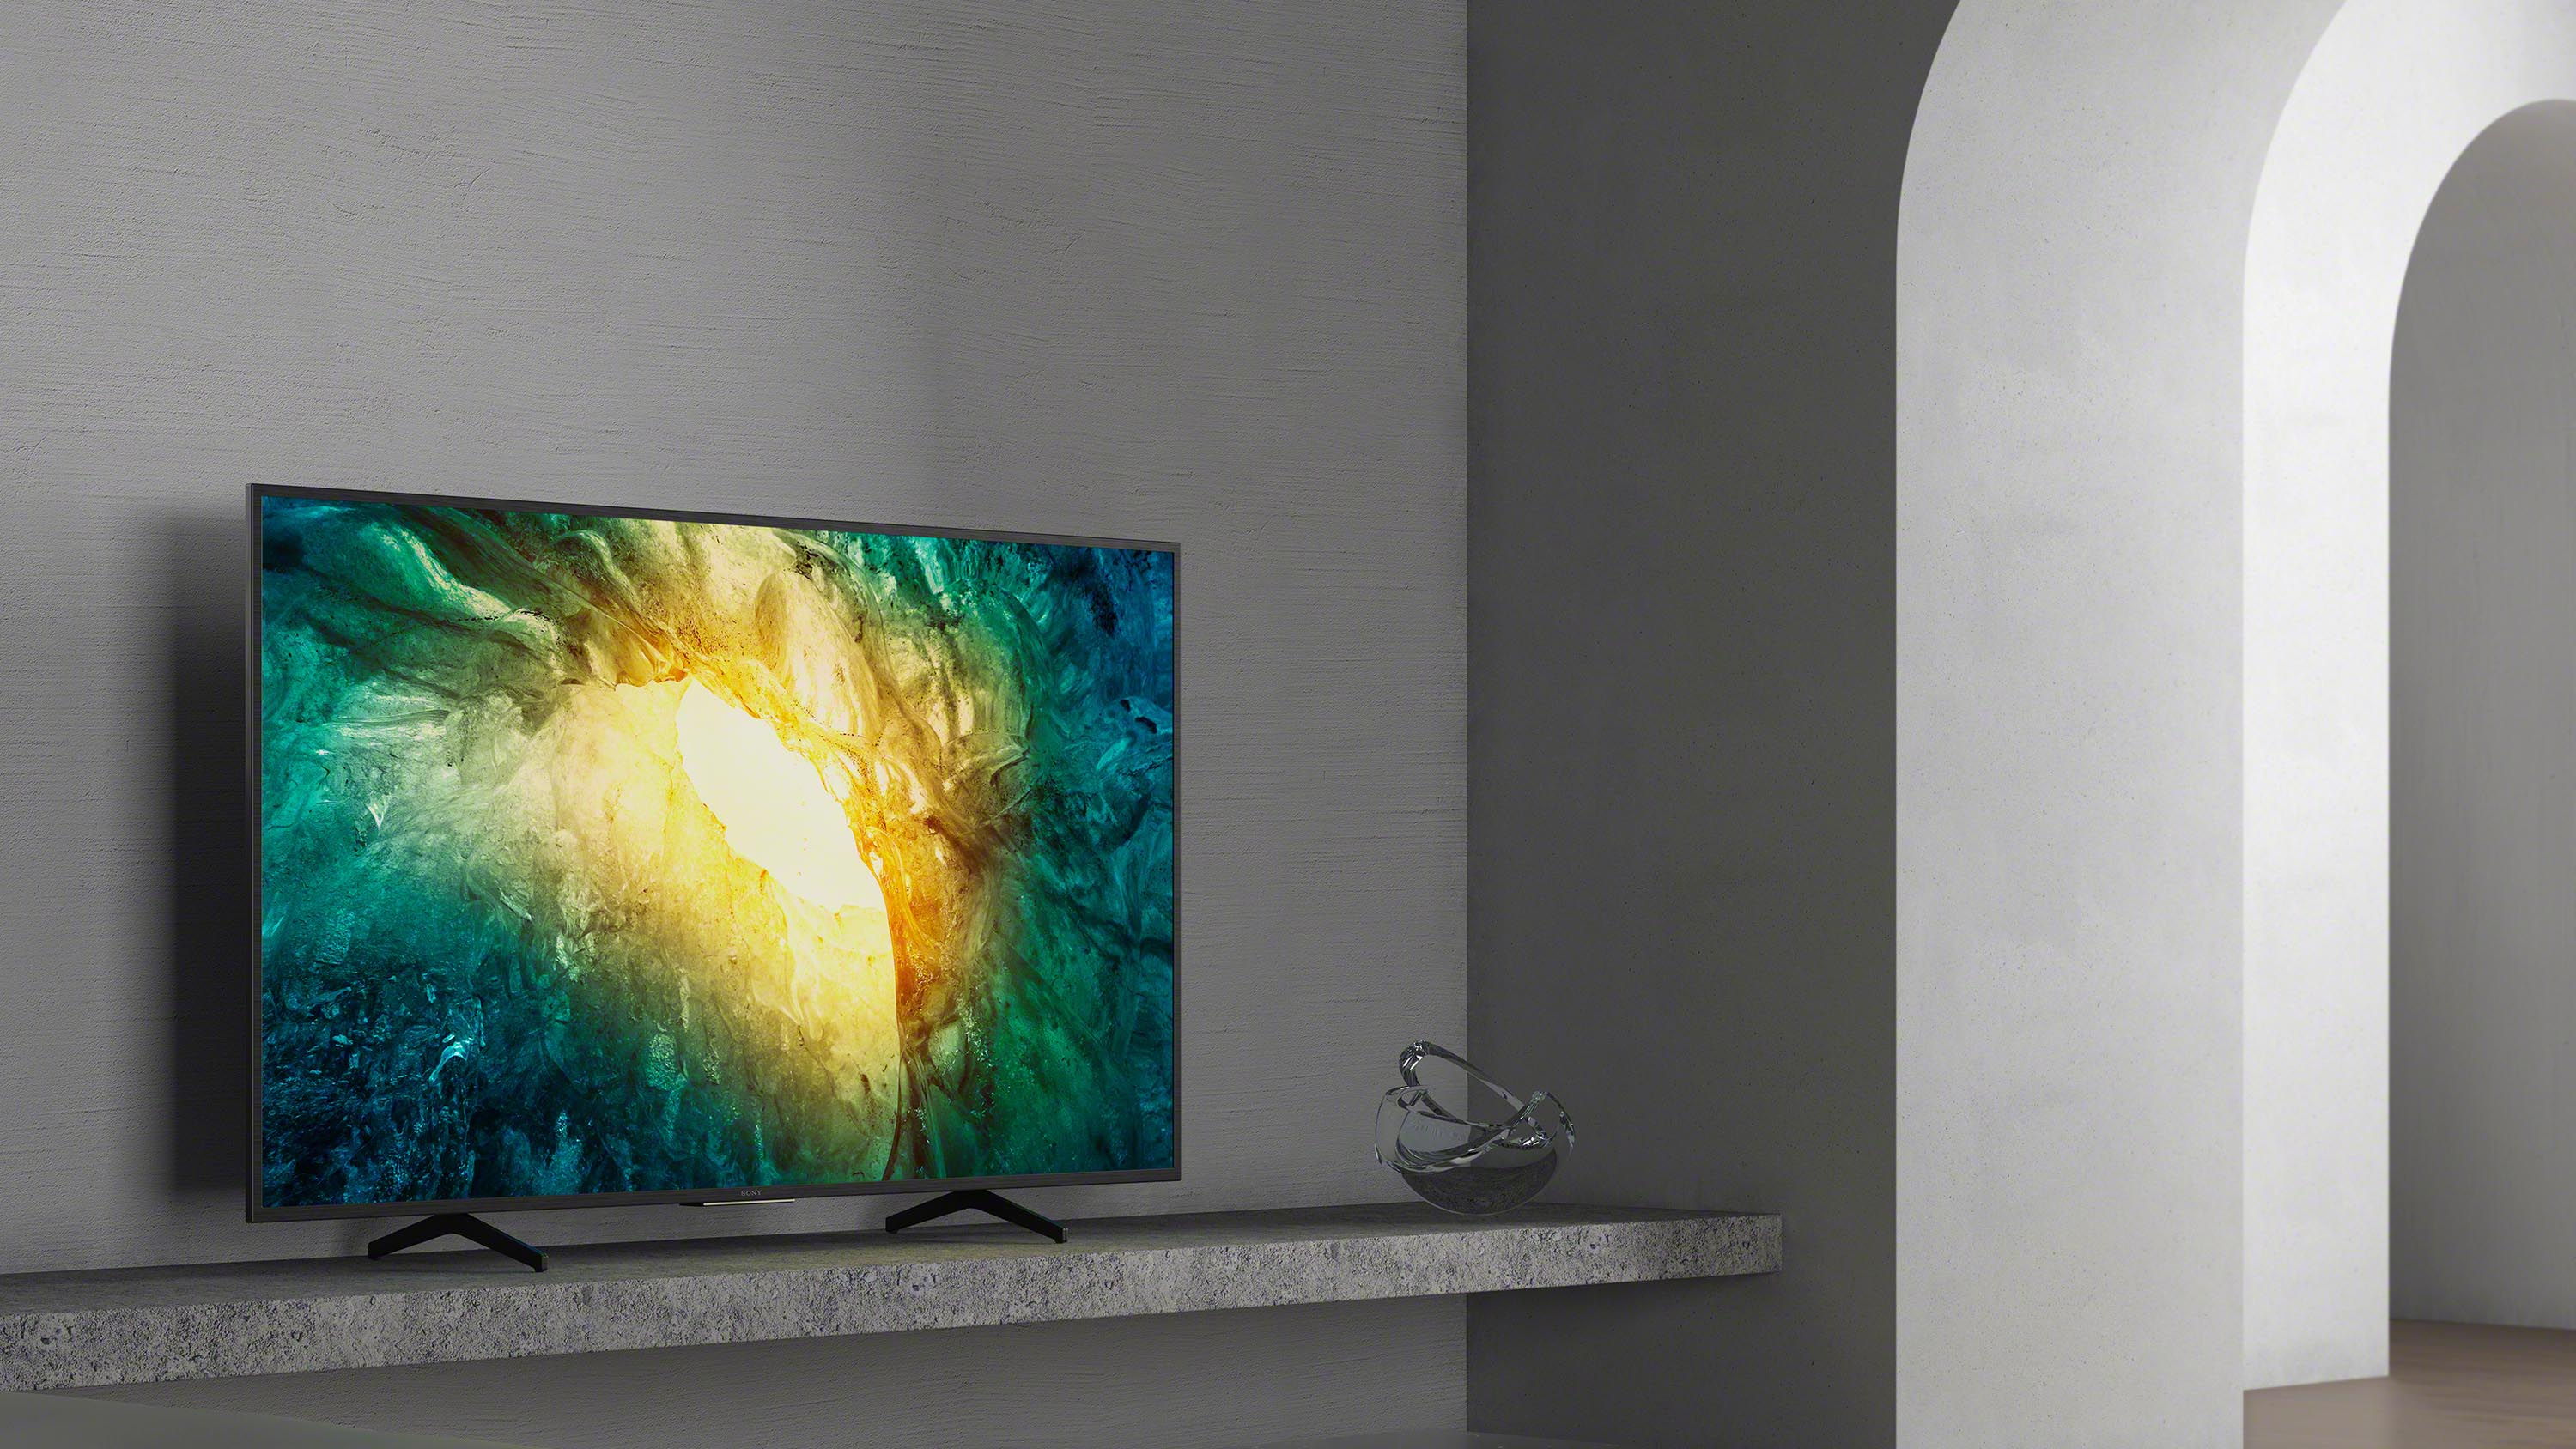 The Sony X70 4K LCD TV in a grey room